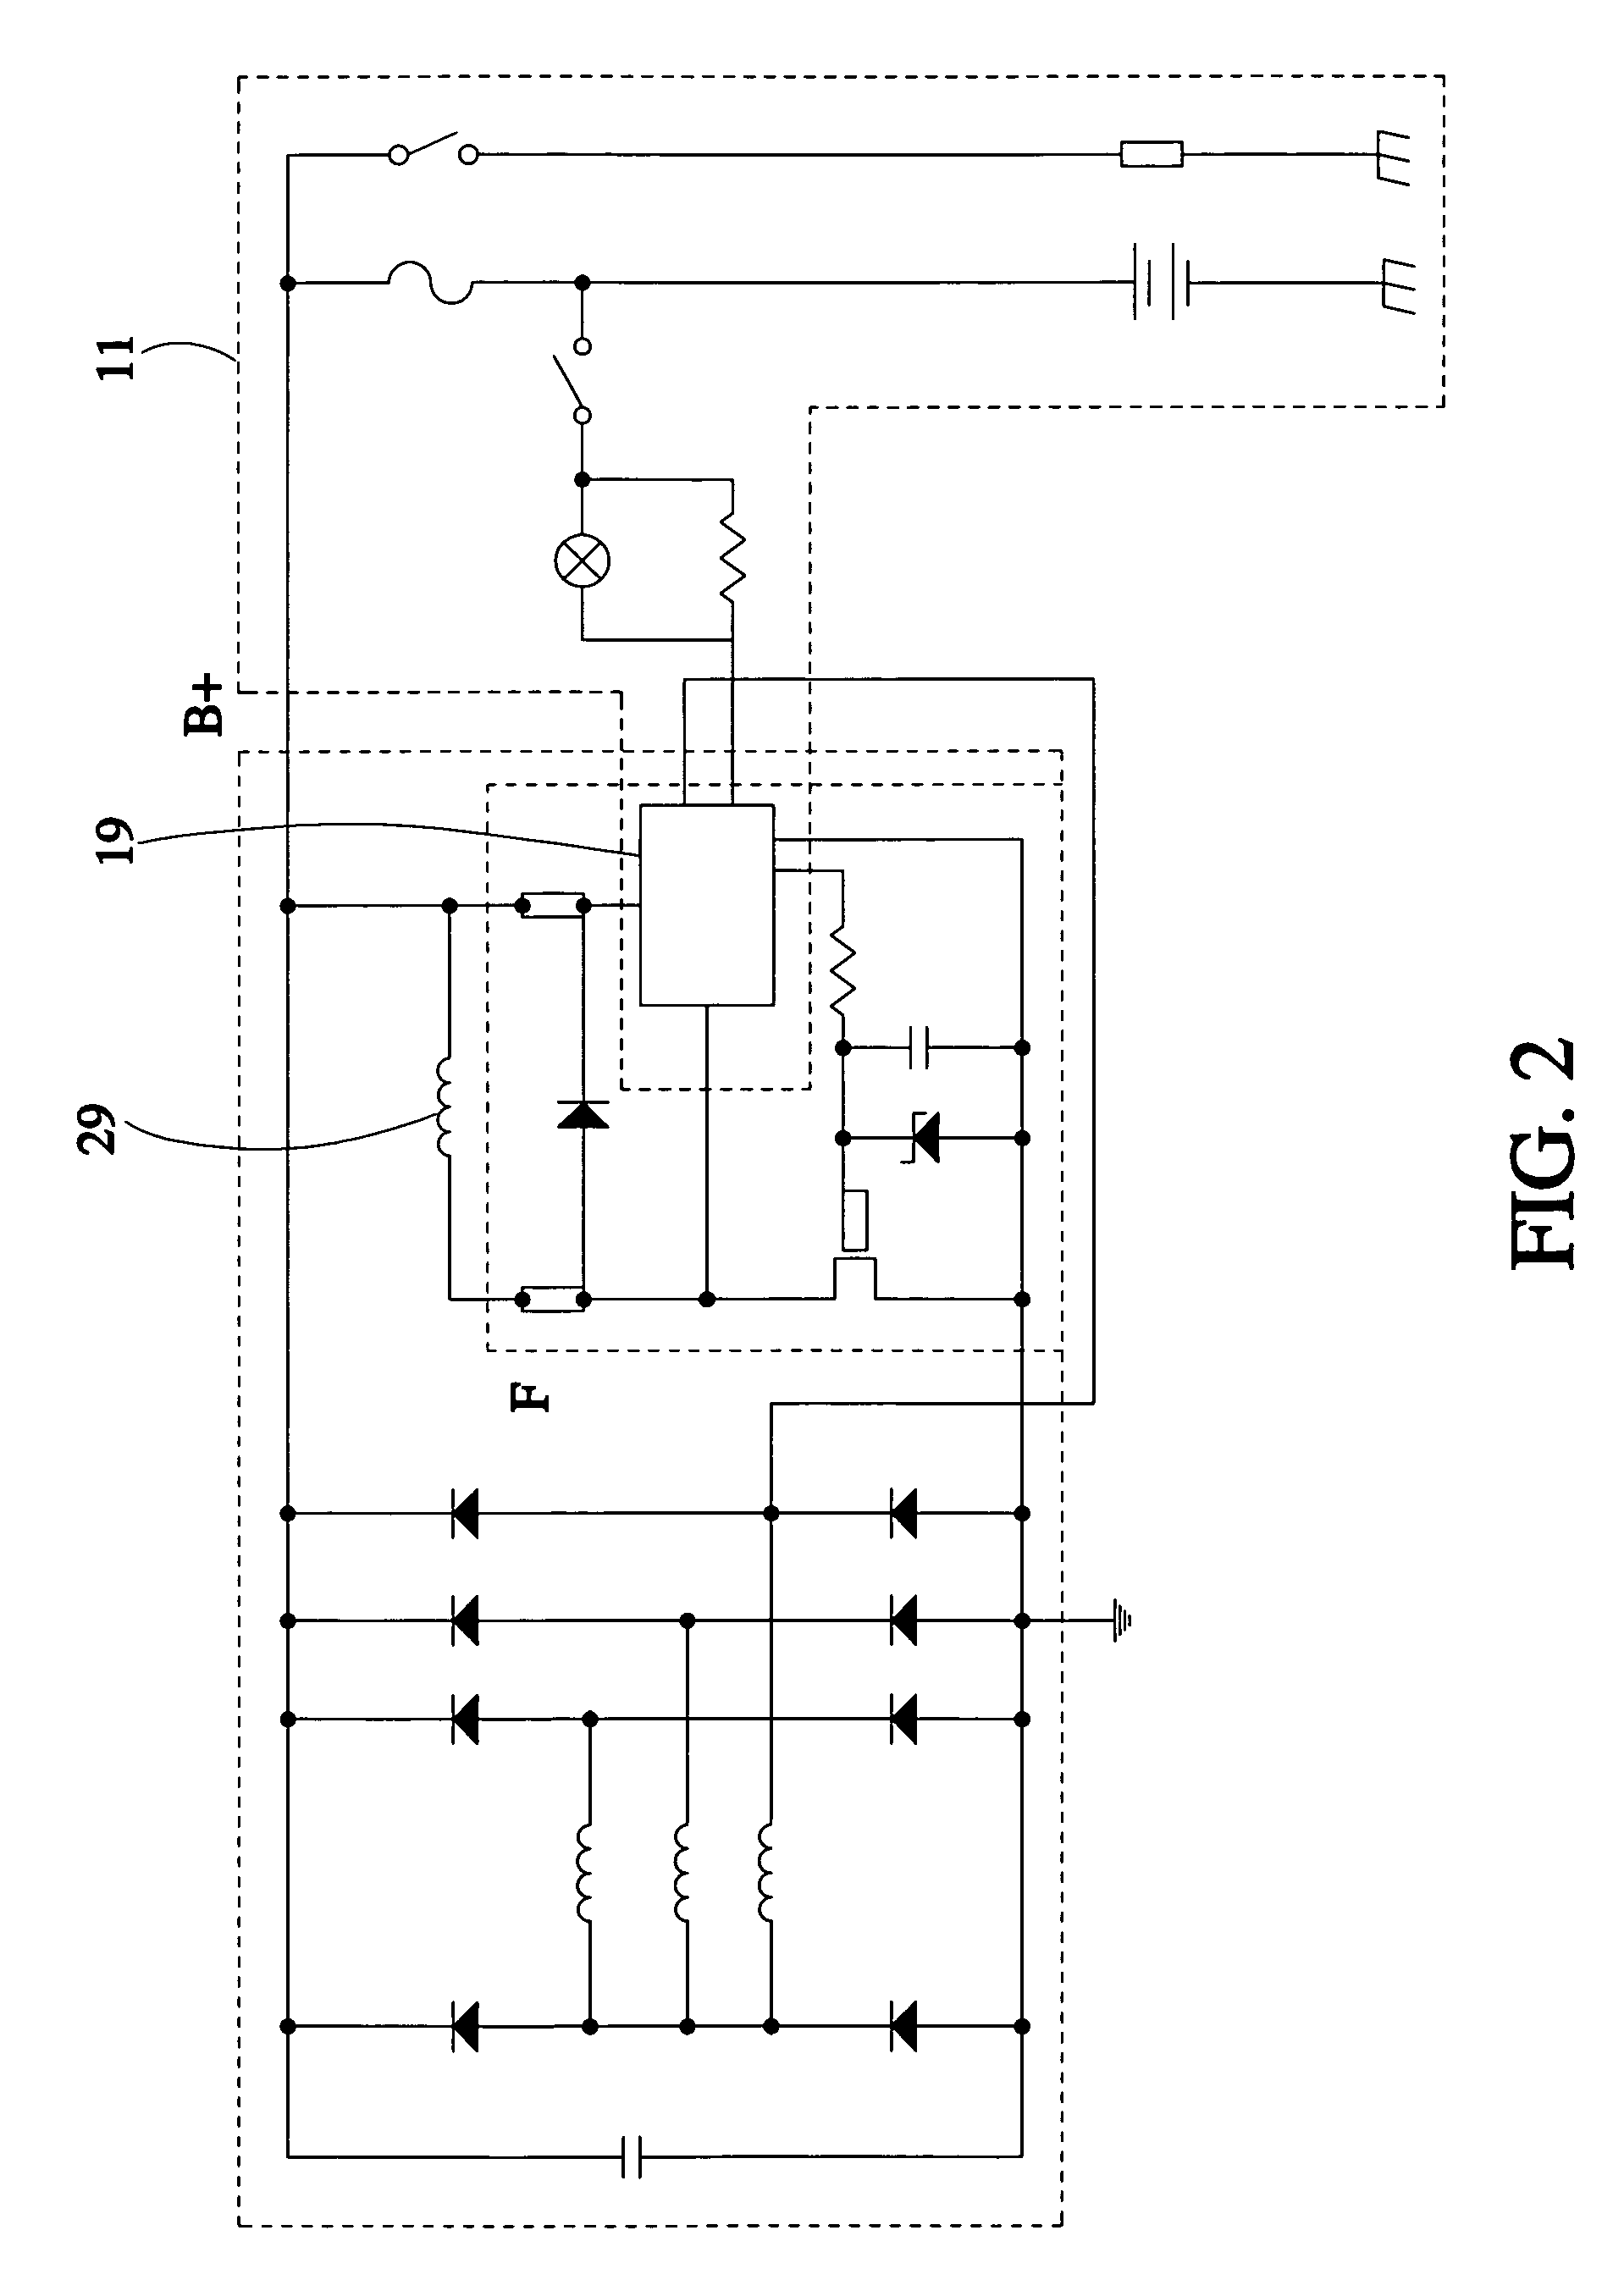 Regulator for eliminating noises generated by automotive power generator